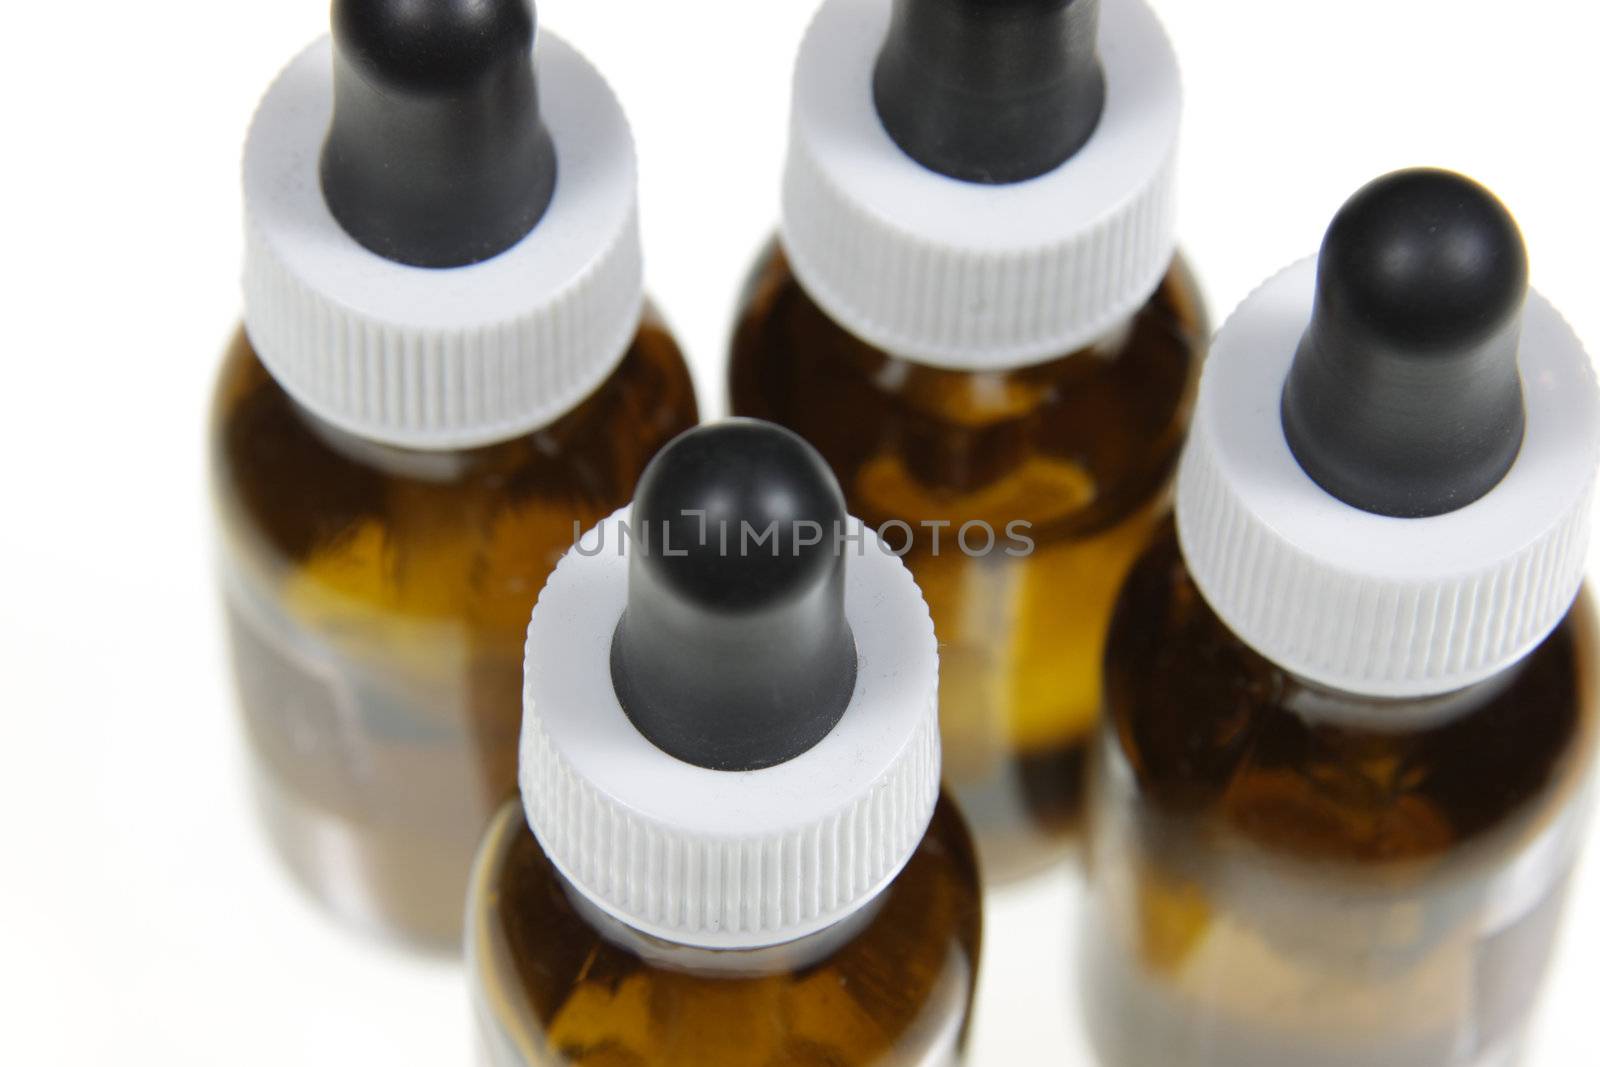 Four dropper bottles containing naturopathic medicine, isolated on a white background.
